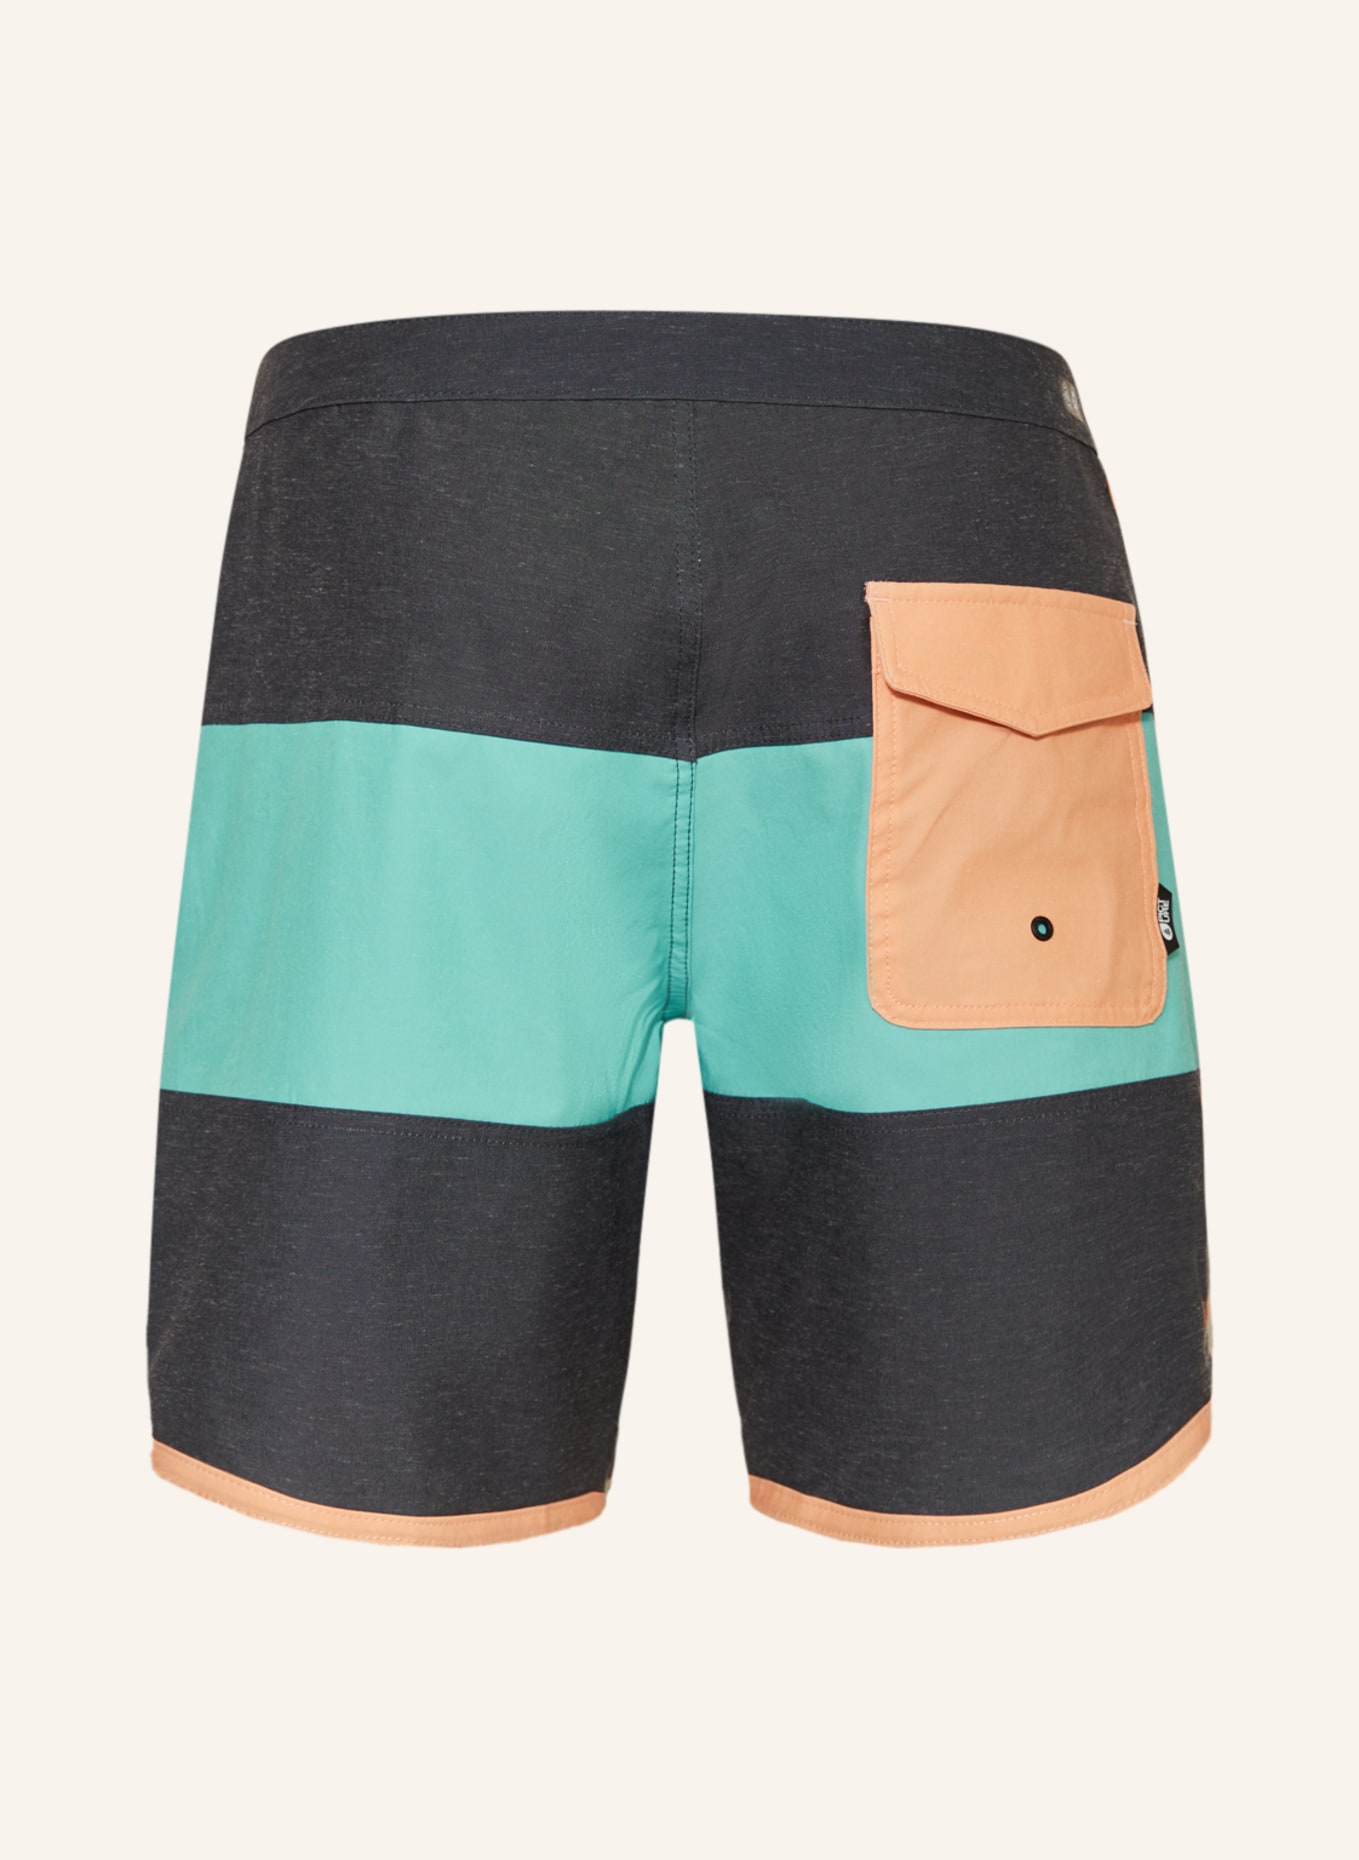 PICTURE Badeshorts ANDY HERITAGE SOLID 17, Farbe: GRAU/ MINT (Bild 2)